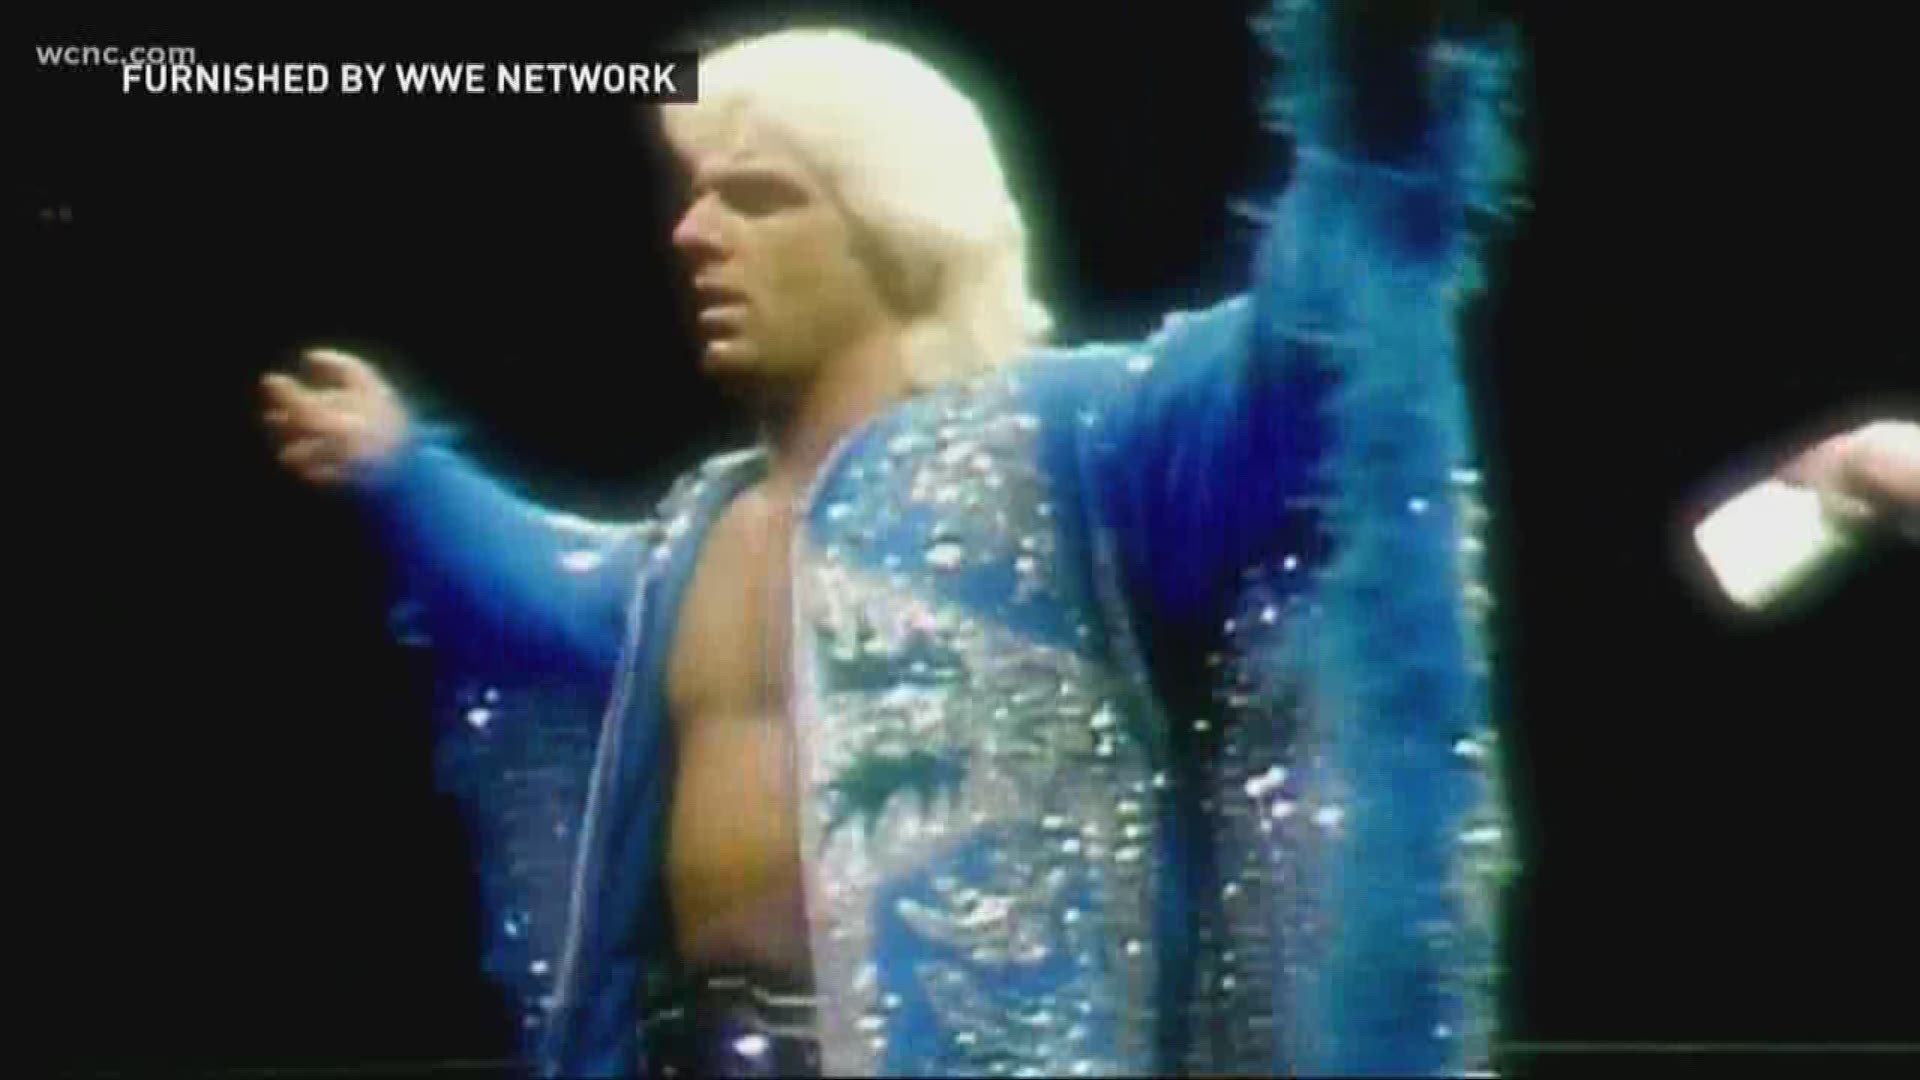 Flair was on the verge of dying in 2017 when he was placed in a medically induced coma for 11 days after his intestine ruptured.